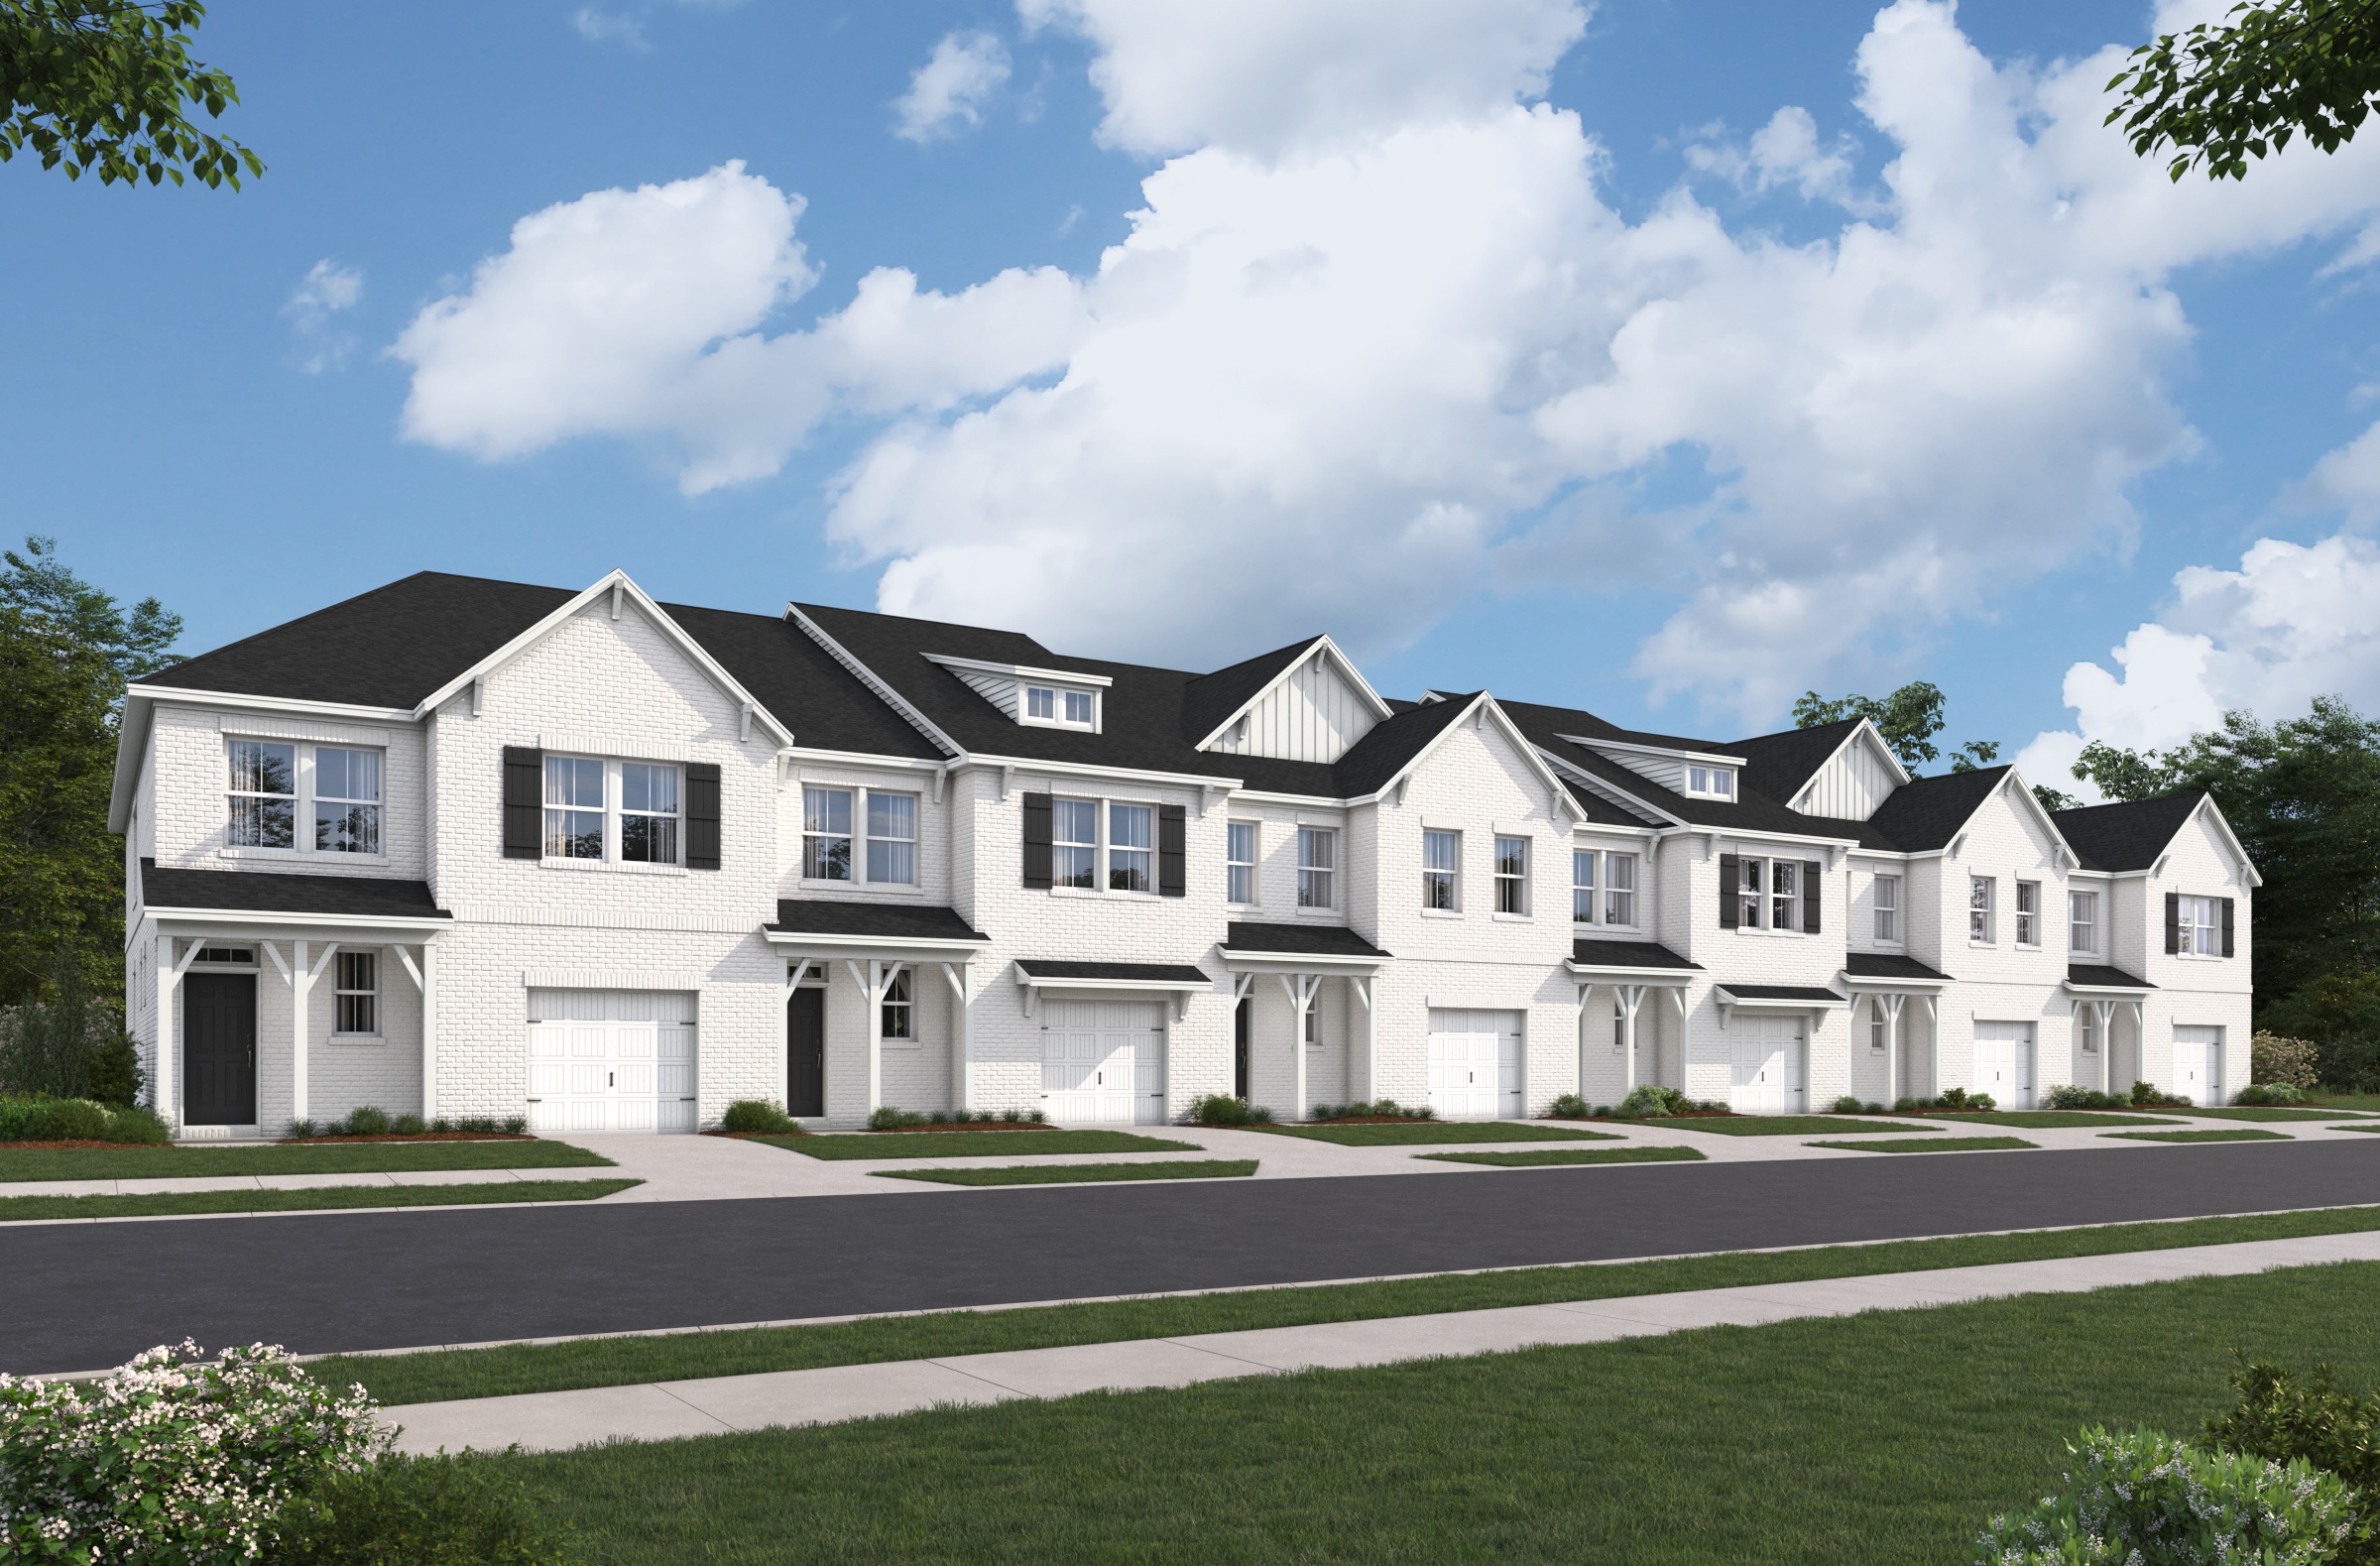 Rendering of new townhomes being offered by Beazer Homes at Windtree in Mt. Juliet, Tenn.